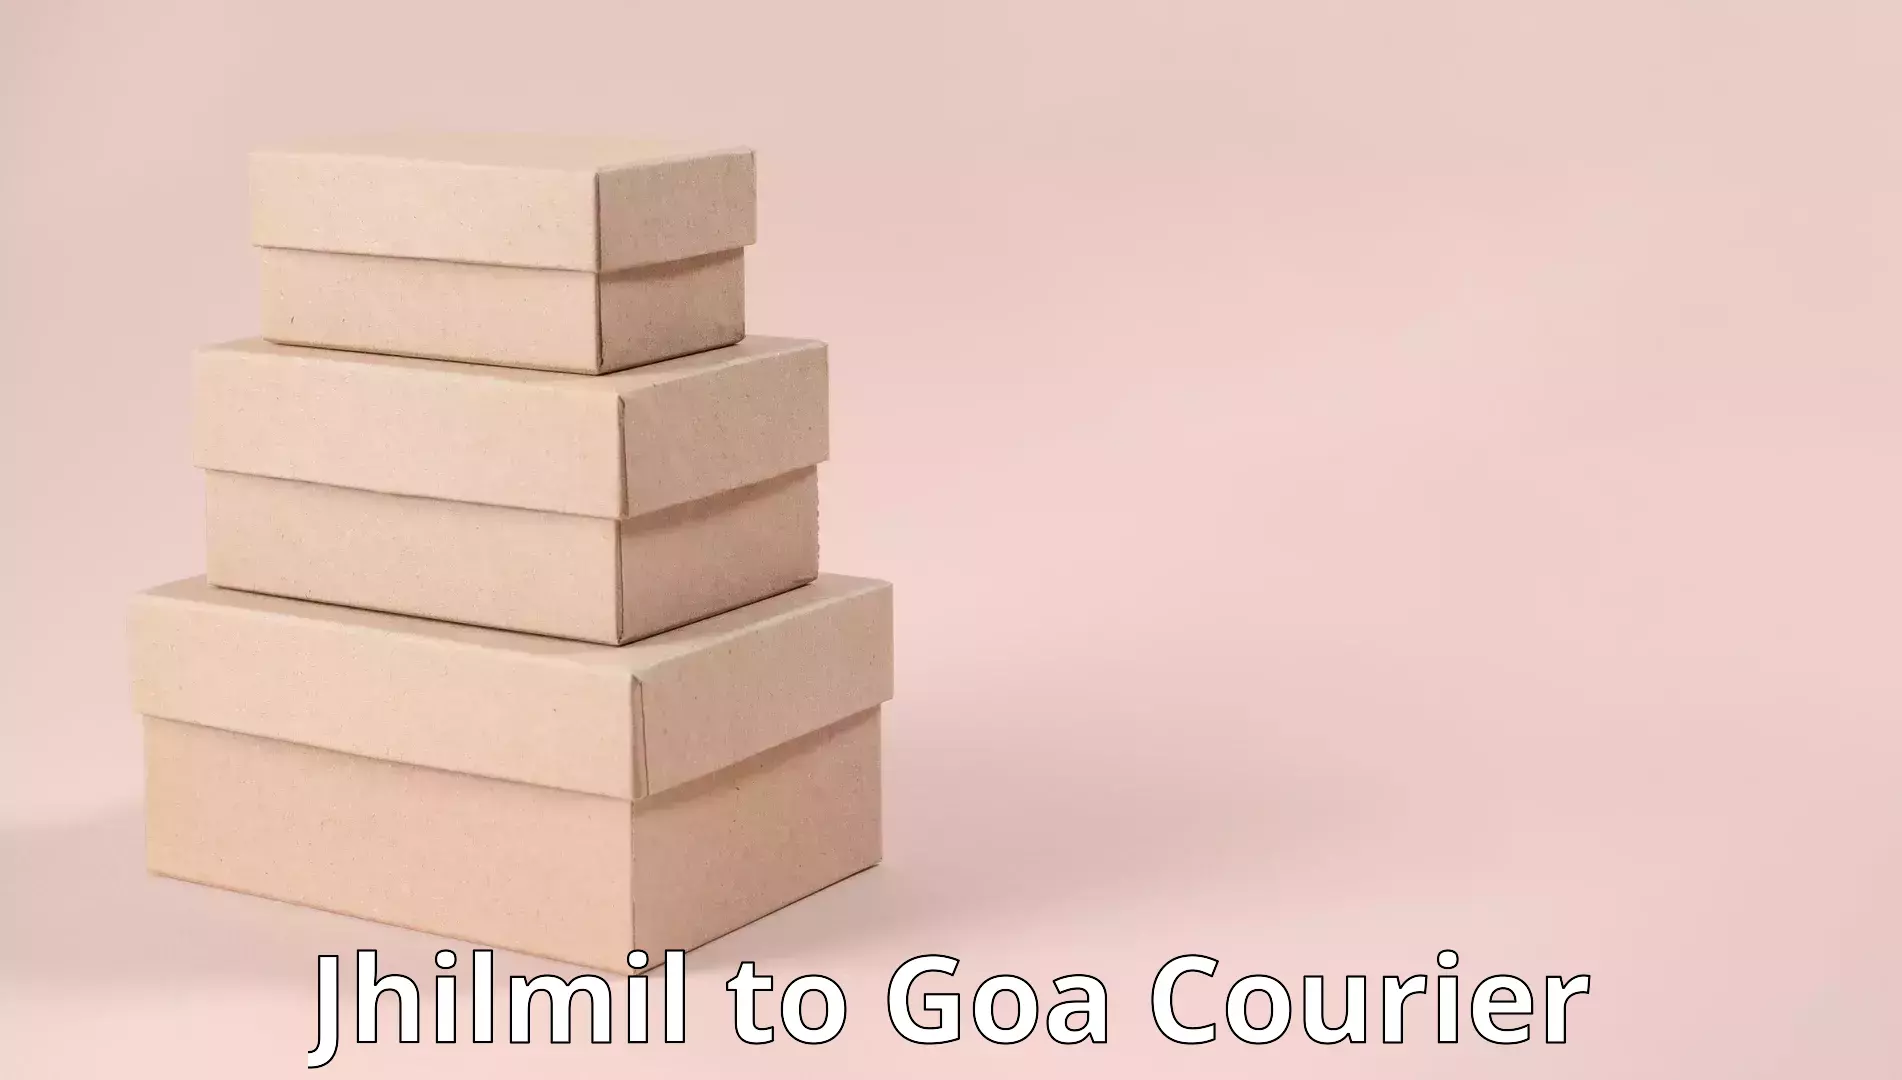 Furniture transport service in Jhilmil to IIT Goa